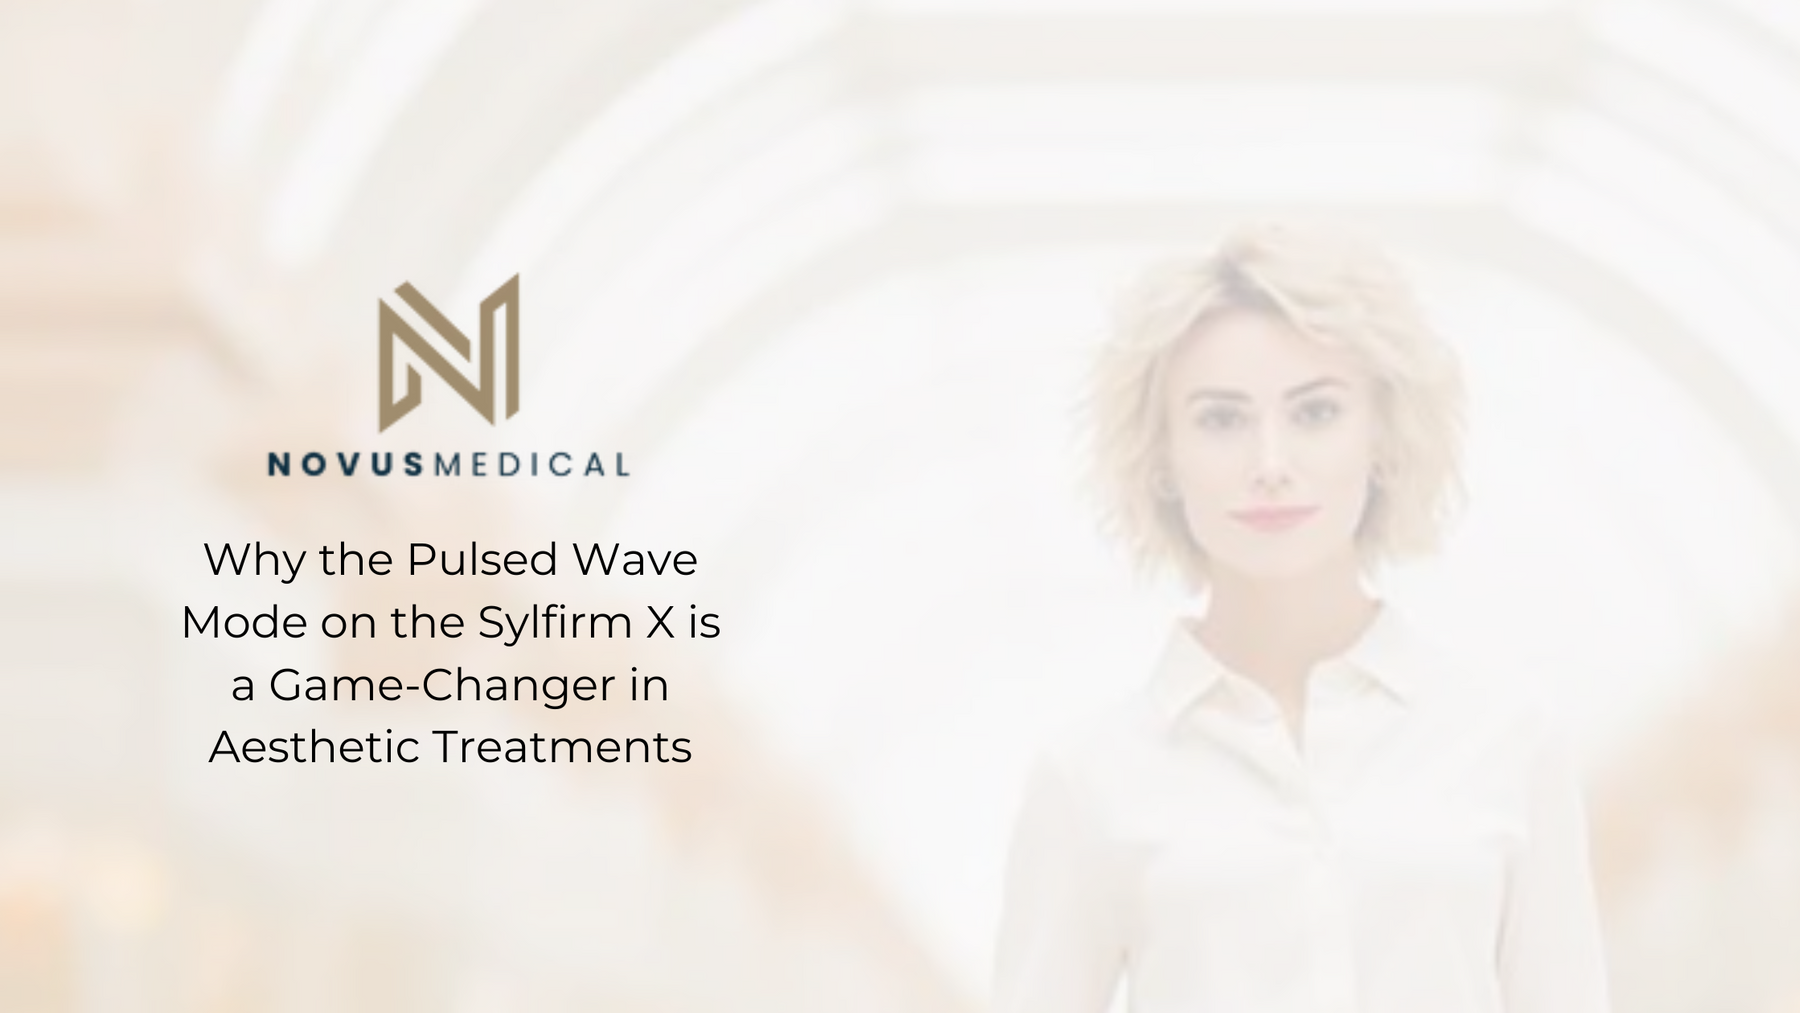 Why the Pulsed Wave Mode on the Sylfirm X is a Game-Changer in Aesthetic Treatments